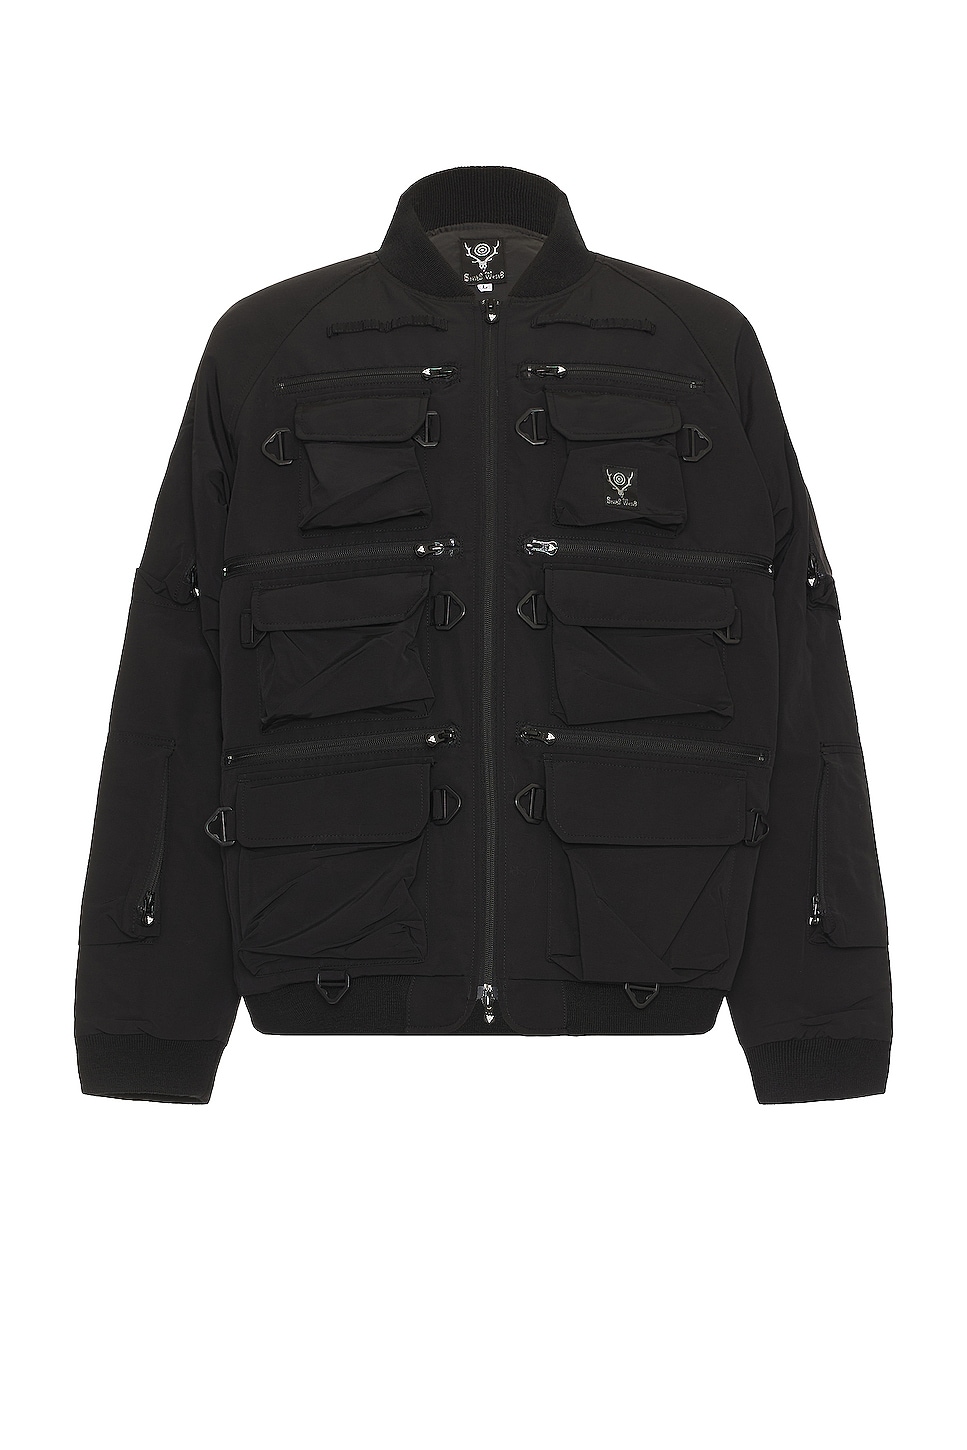 Image 1 of South2 West8 Multi-pocket Zipped Down Jacket in Black